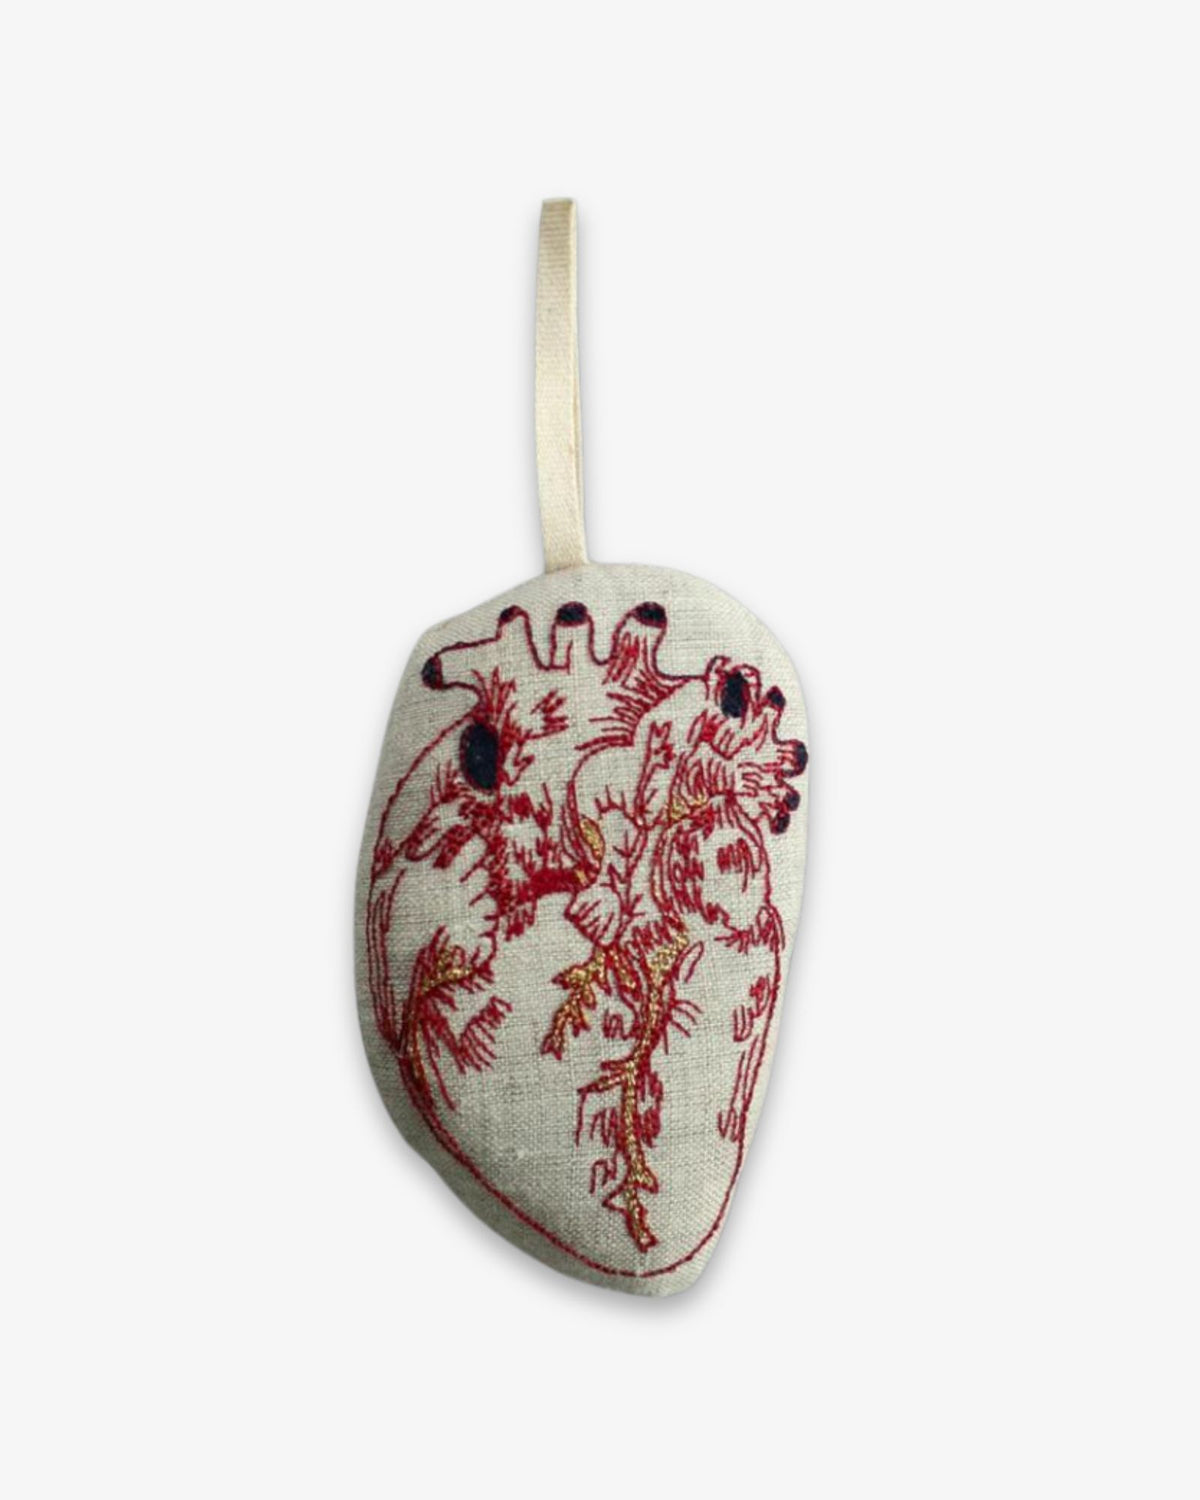 Anatomical Heart Ornament by Skippy Cotton